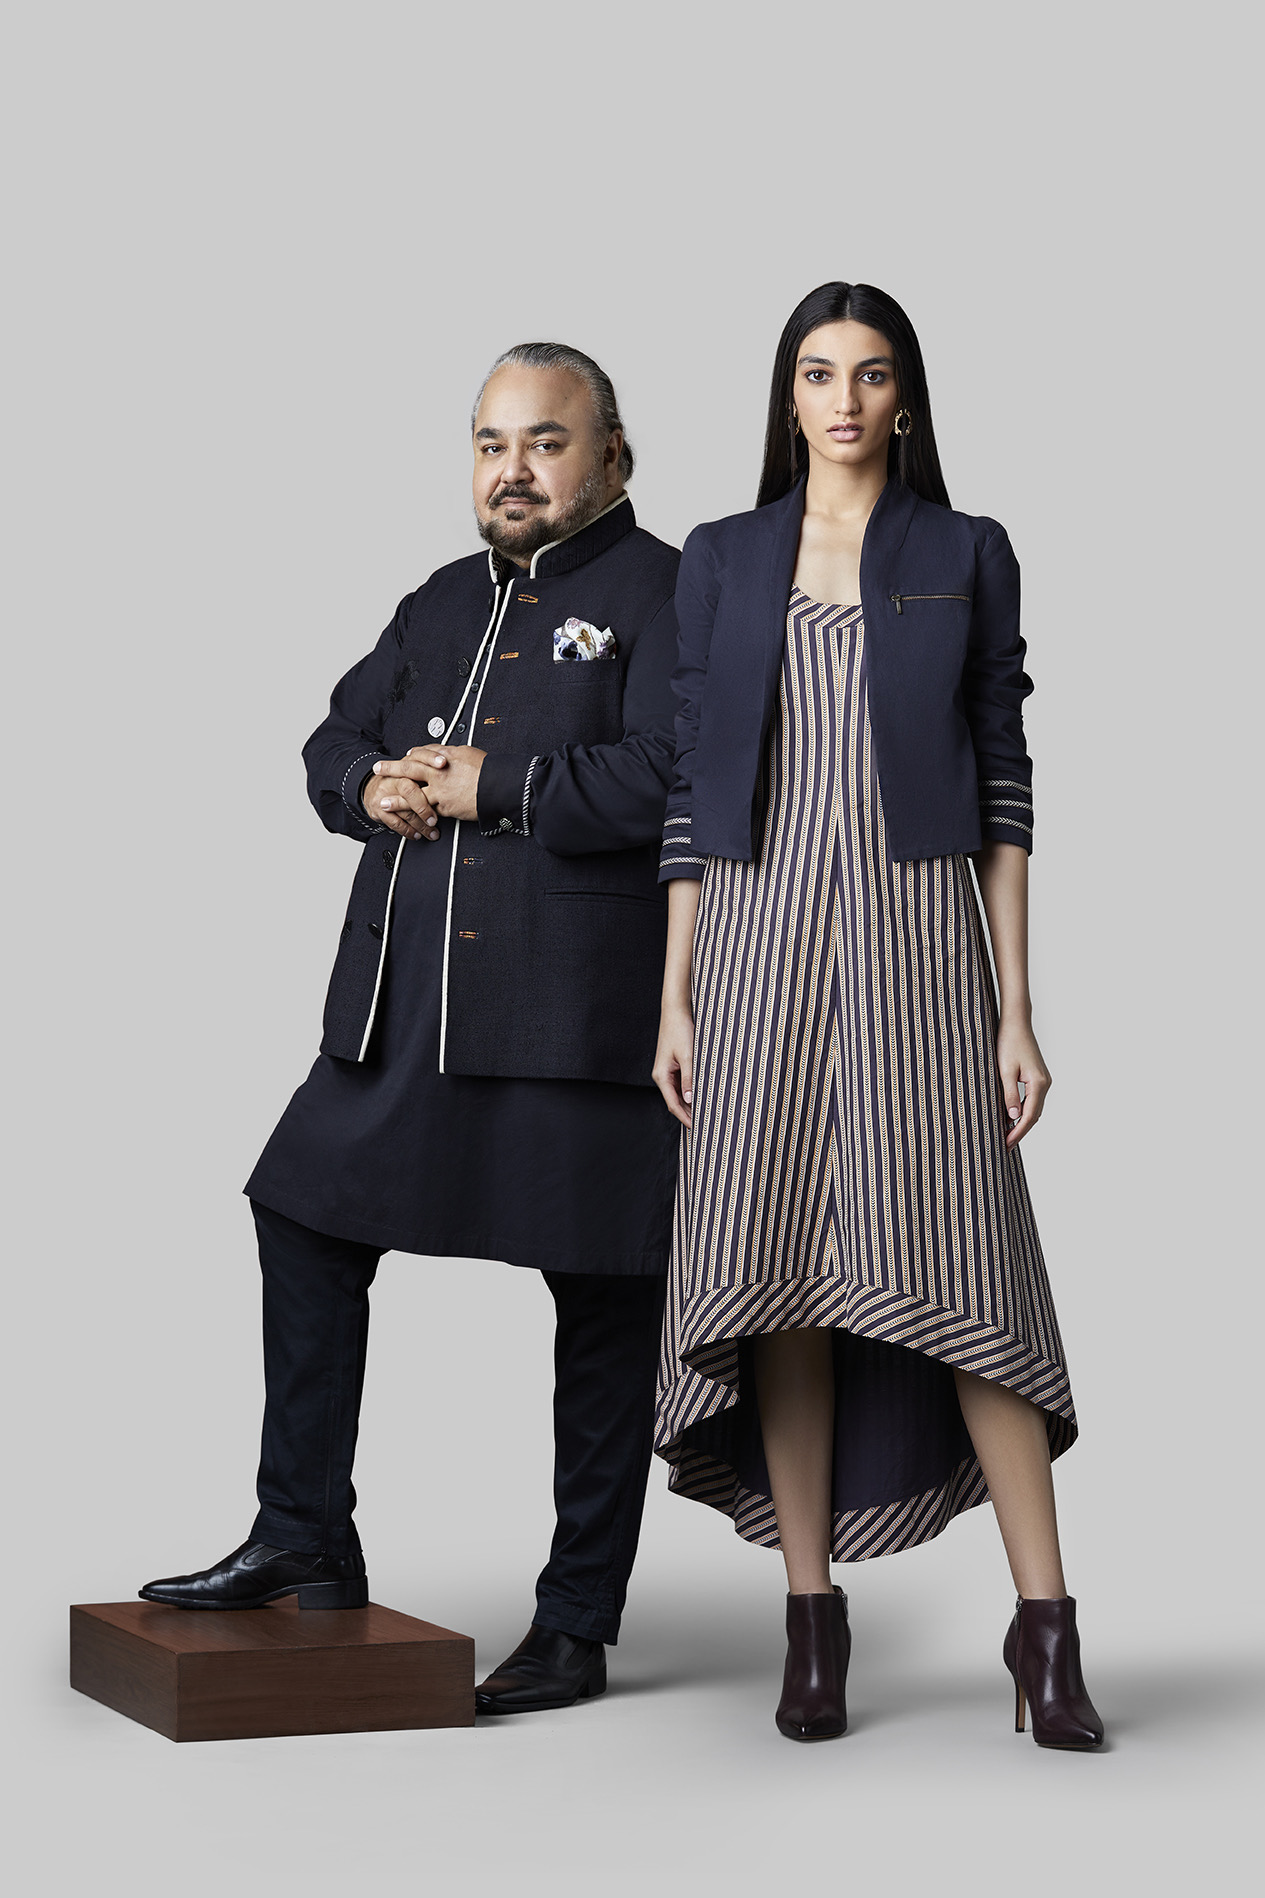 Top fashion designers collaborate to launch affordable fashion line